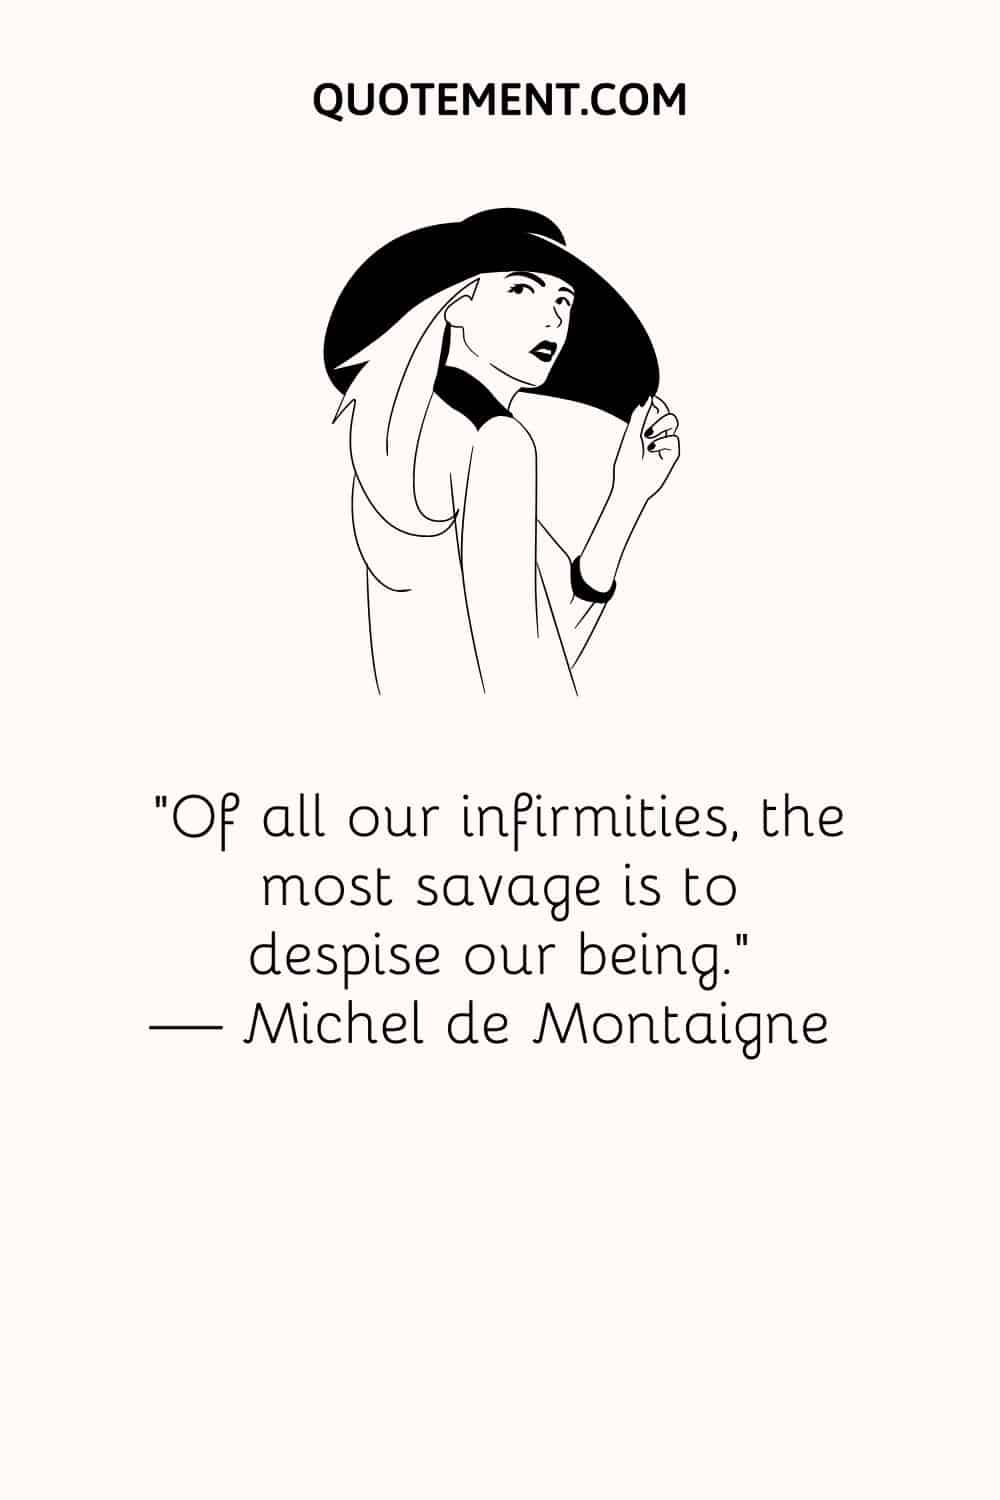 “Of all our infirmities, the most savage is to despise our being.” — Michel de Montaigne